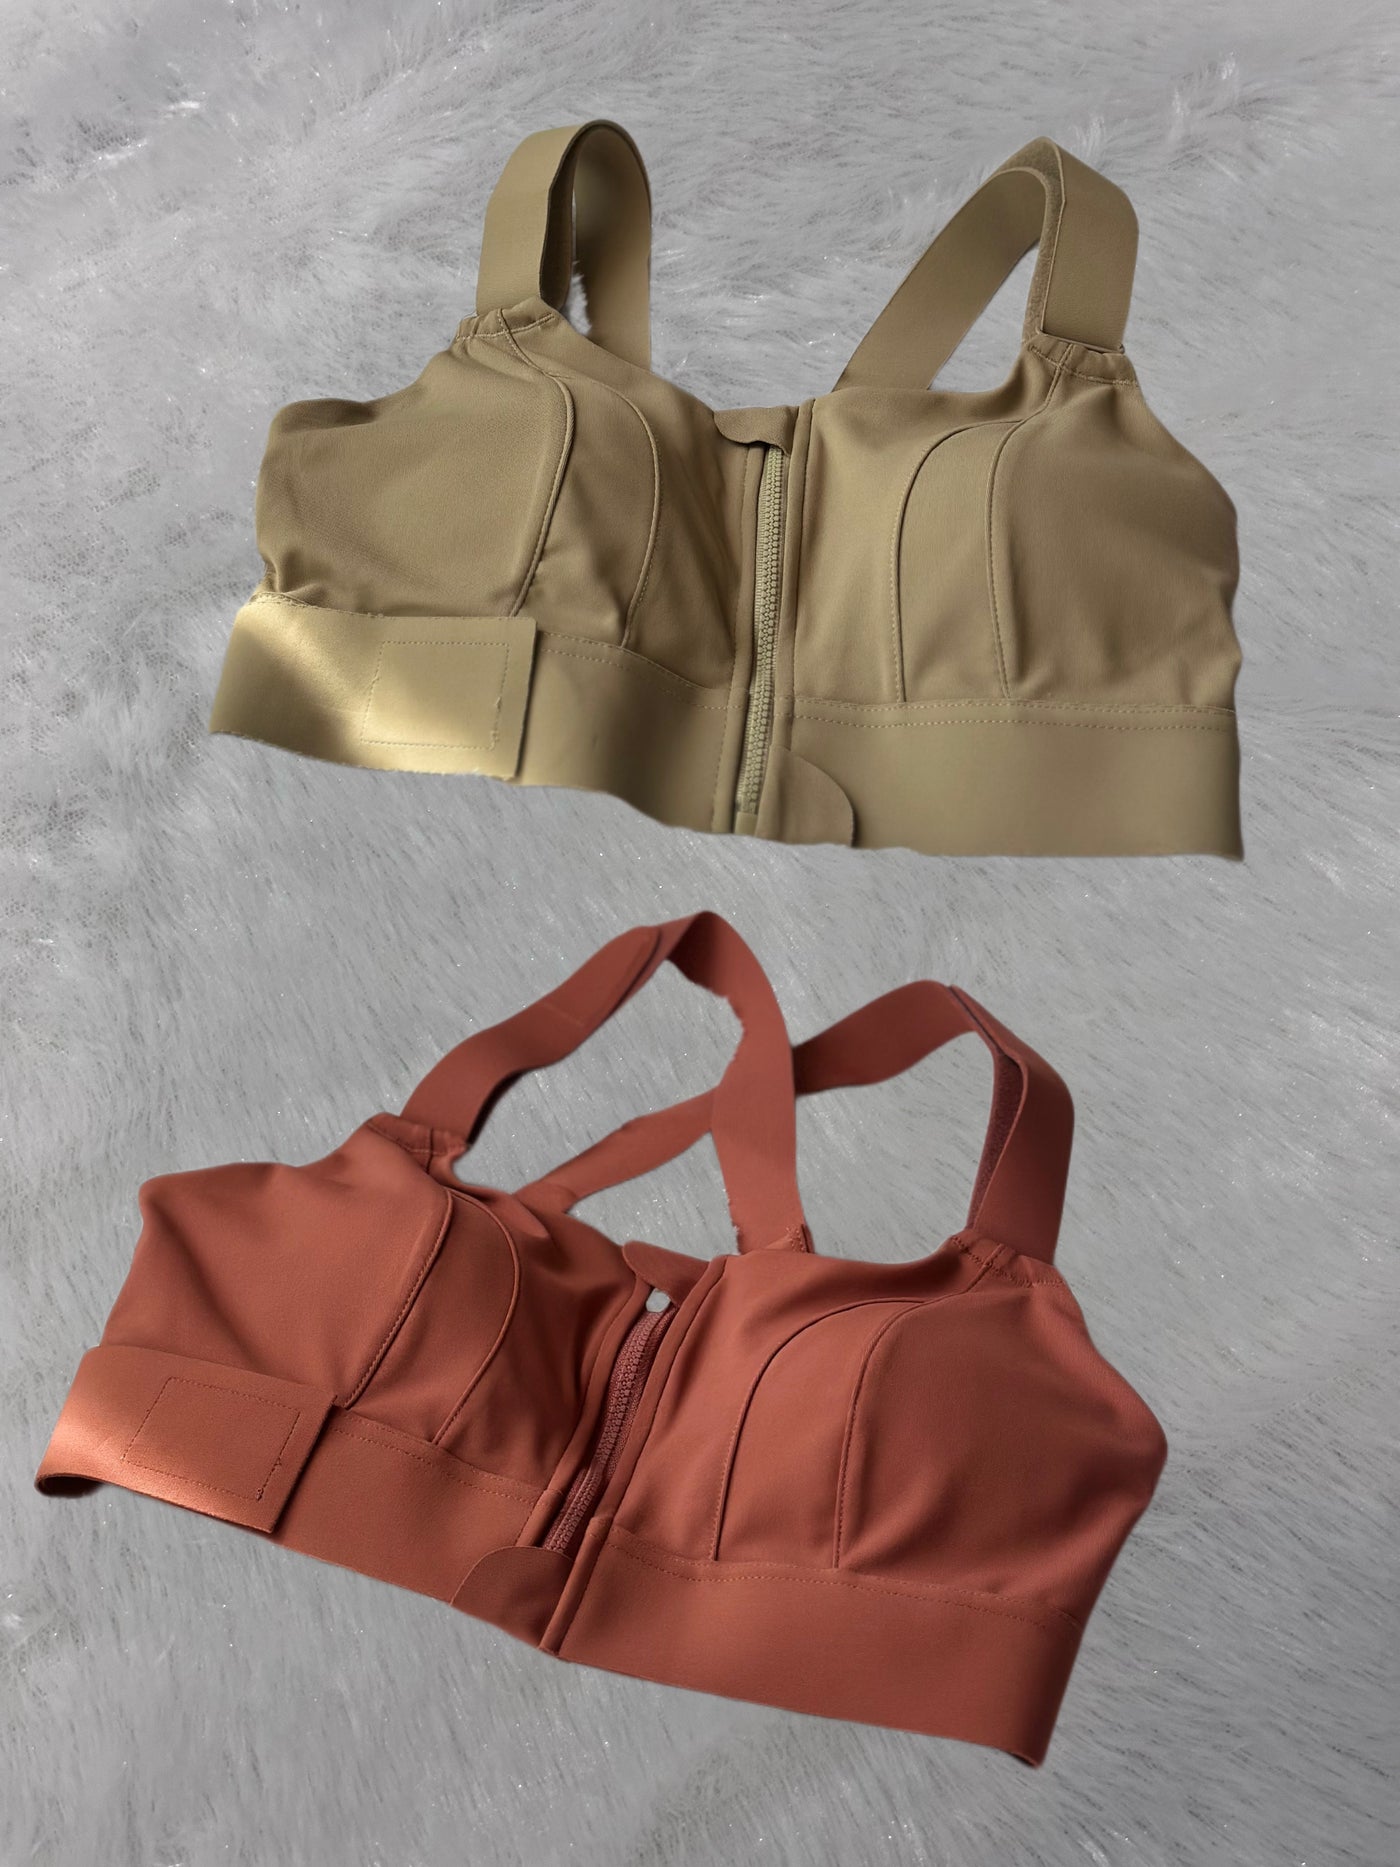 4 colors: High support Straps adjustable padded sports bra